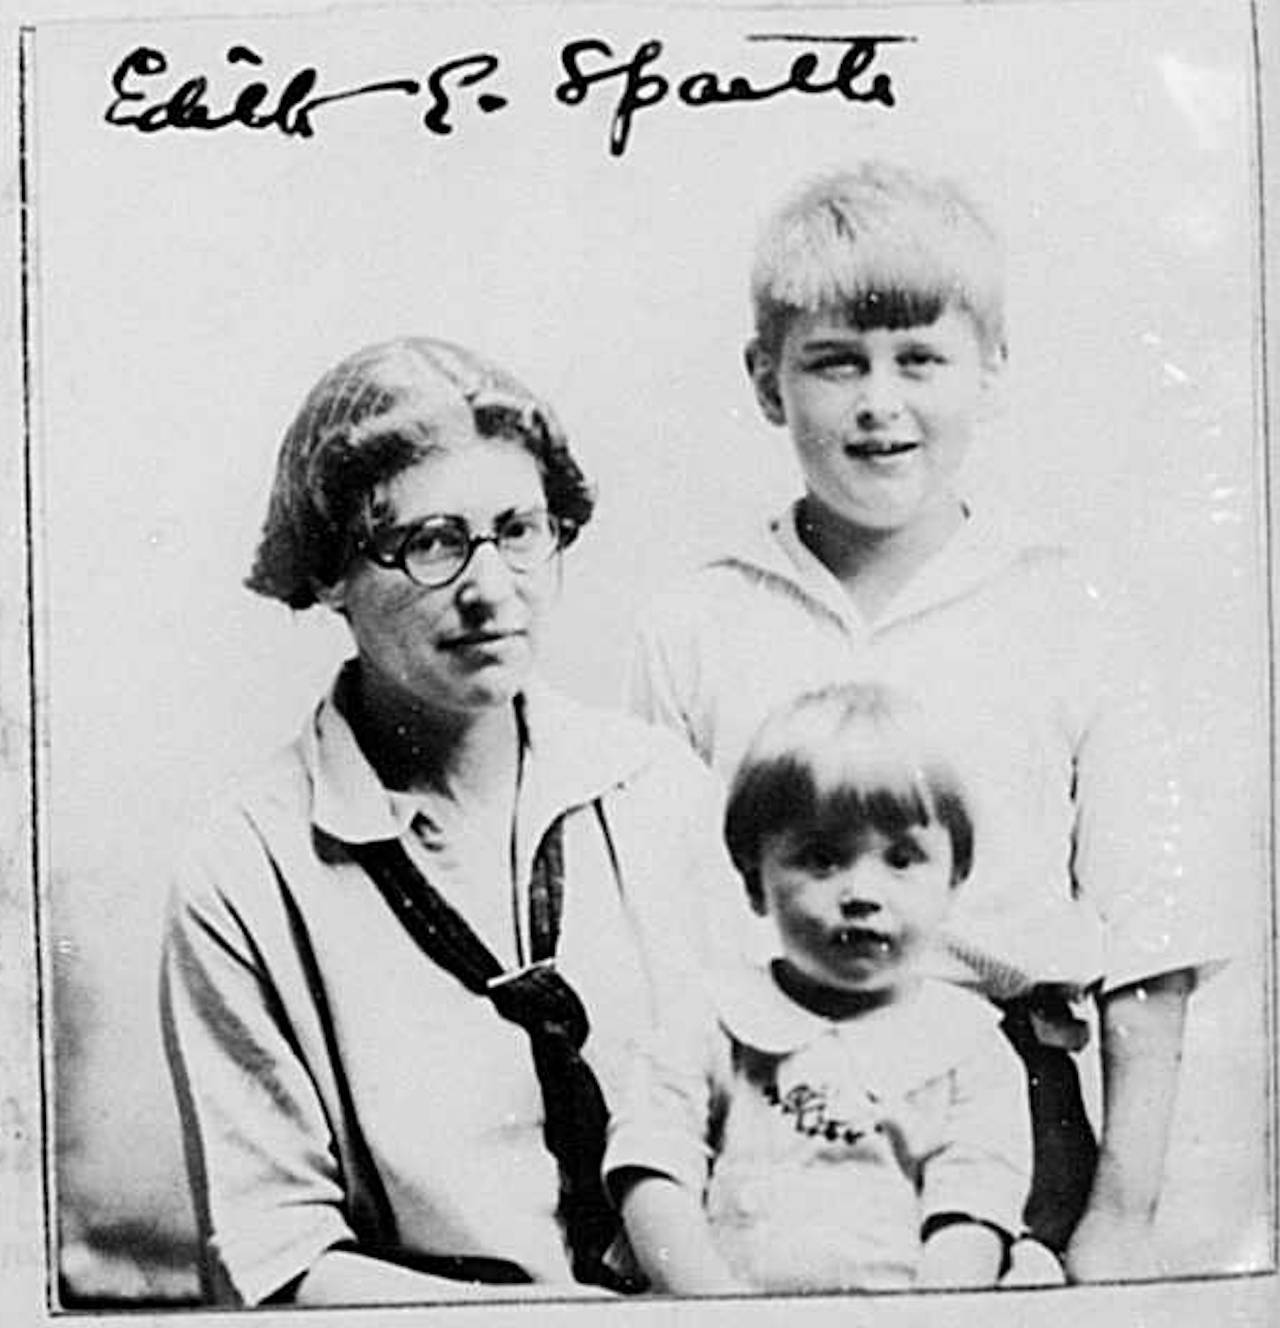 A photo of Edith E. Taussig with her children Walter and Elinor that was attached to a 1924 passport application.